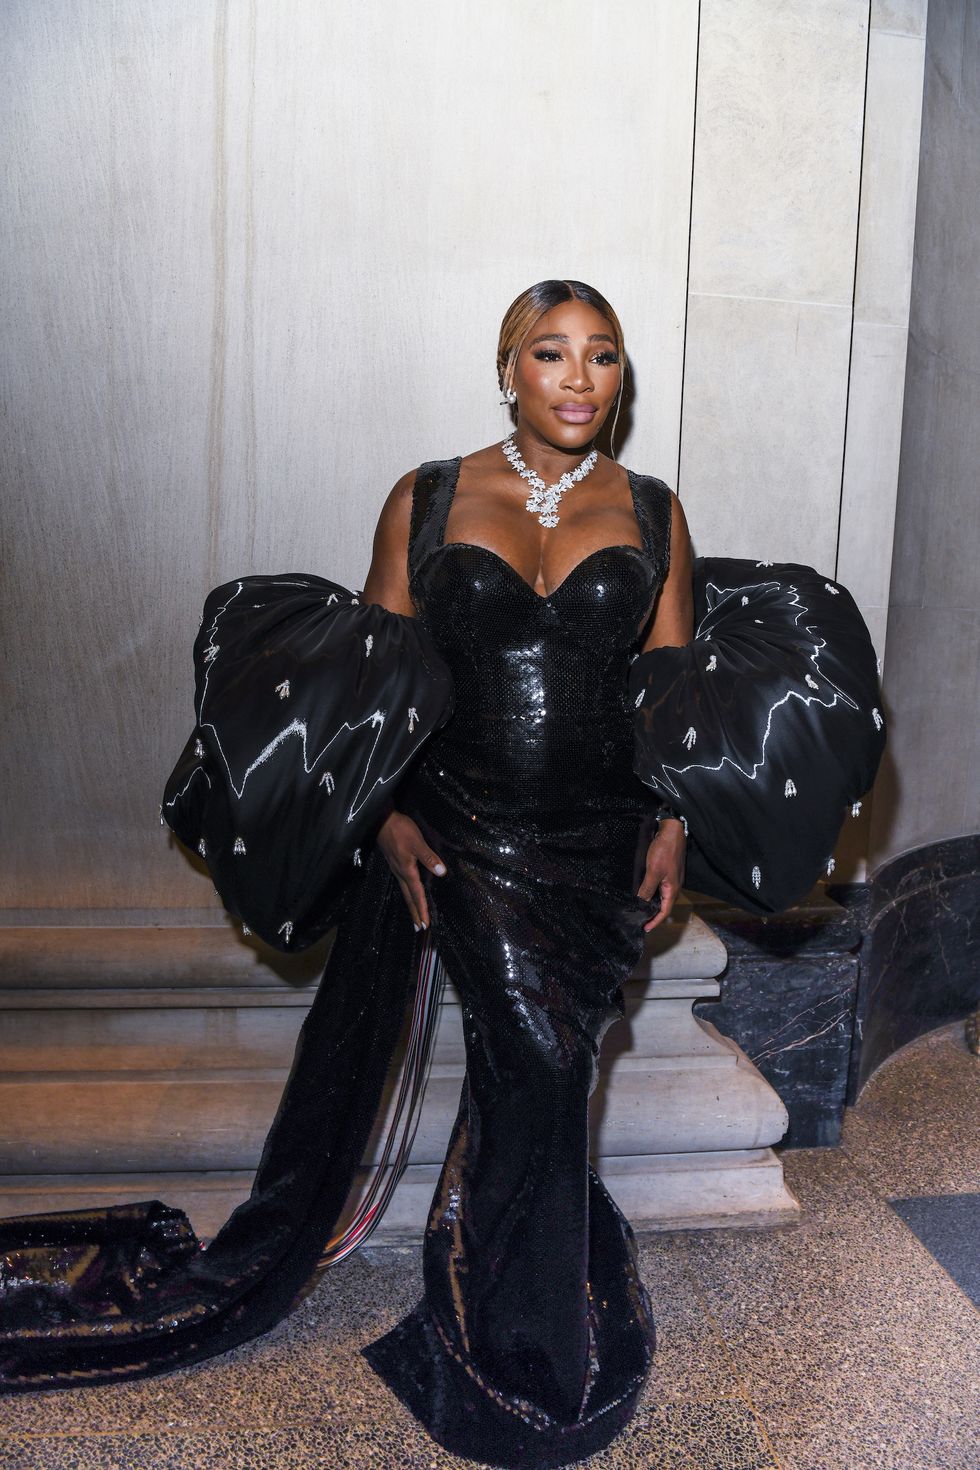 serena williams at the 2023 cfda fashion awards held at the american museum of natural history on november 6, 2023 in new york, new york photo by nina westerveltwwd via getty images